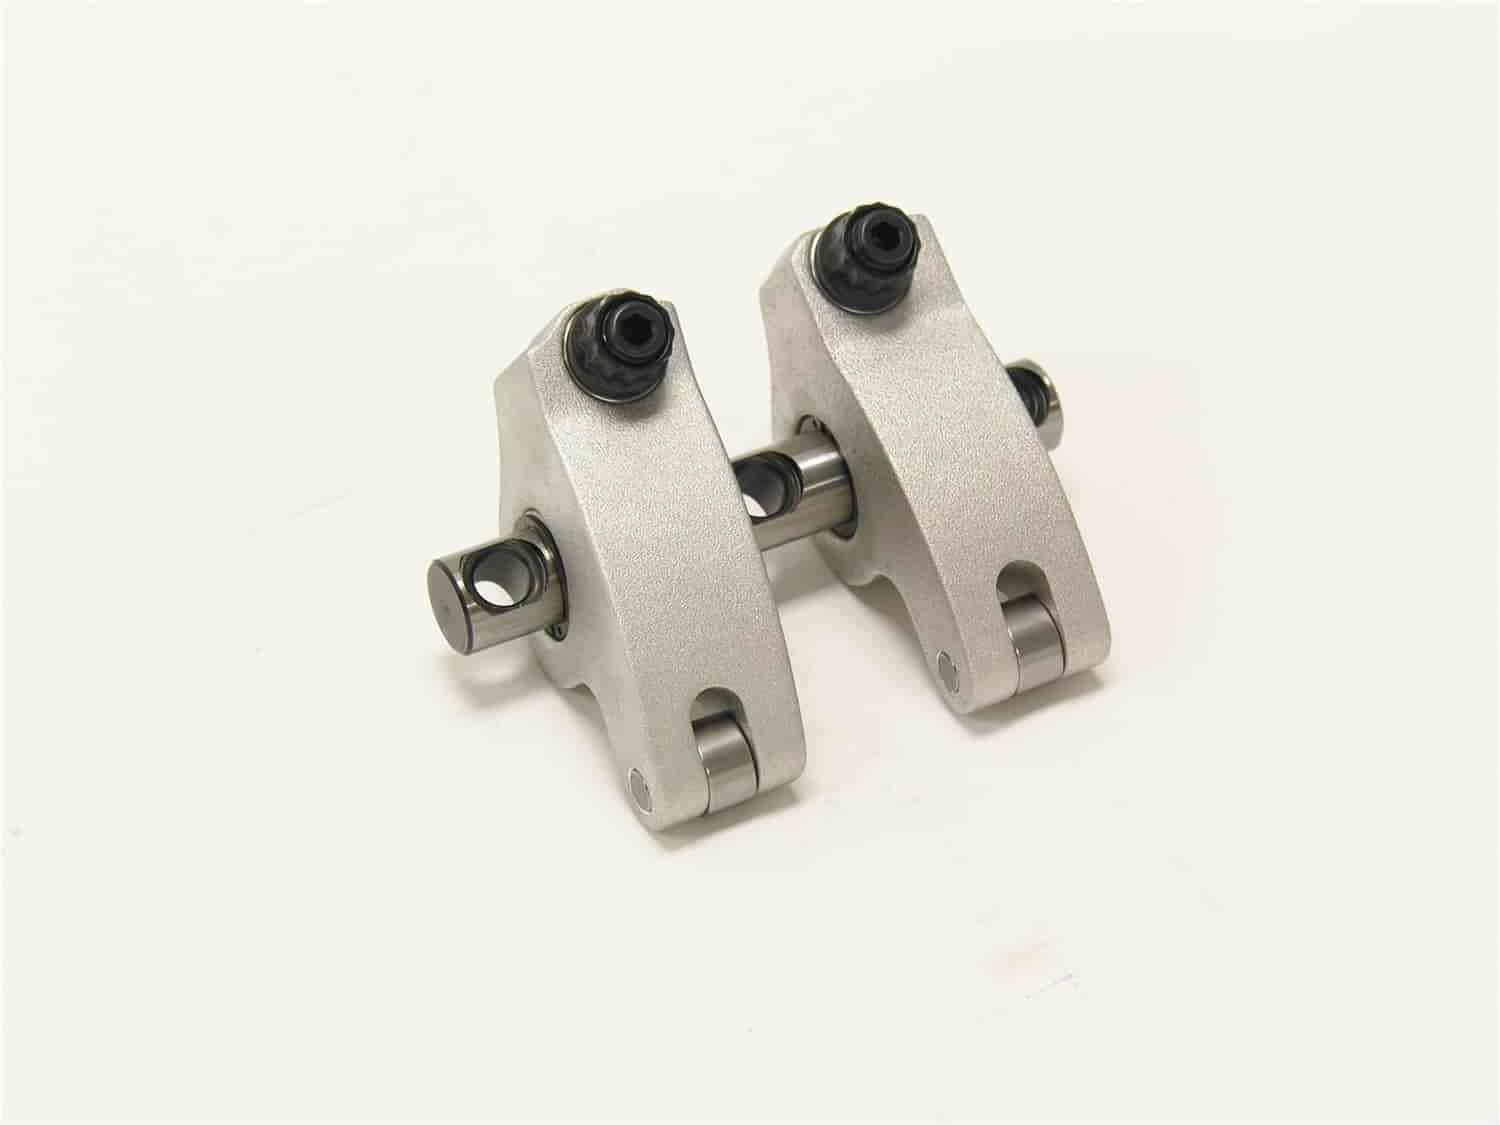 Series SS Shaft Mount Rockers Fits: World Products Motown Rocker Ratio: 1.6 IN / 1.6 EX